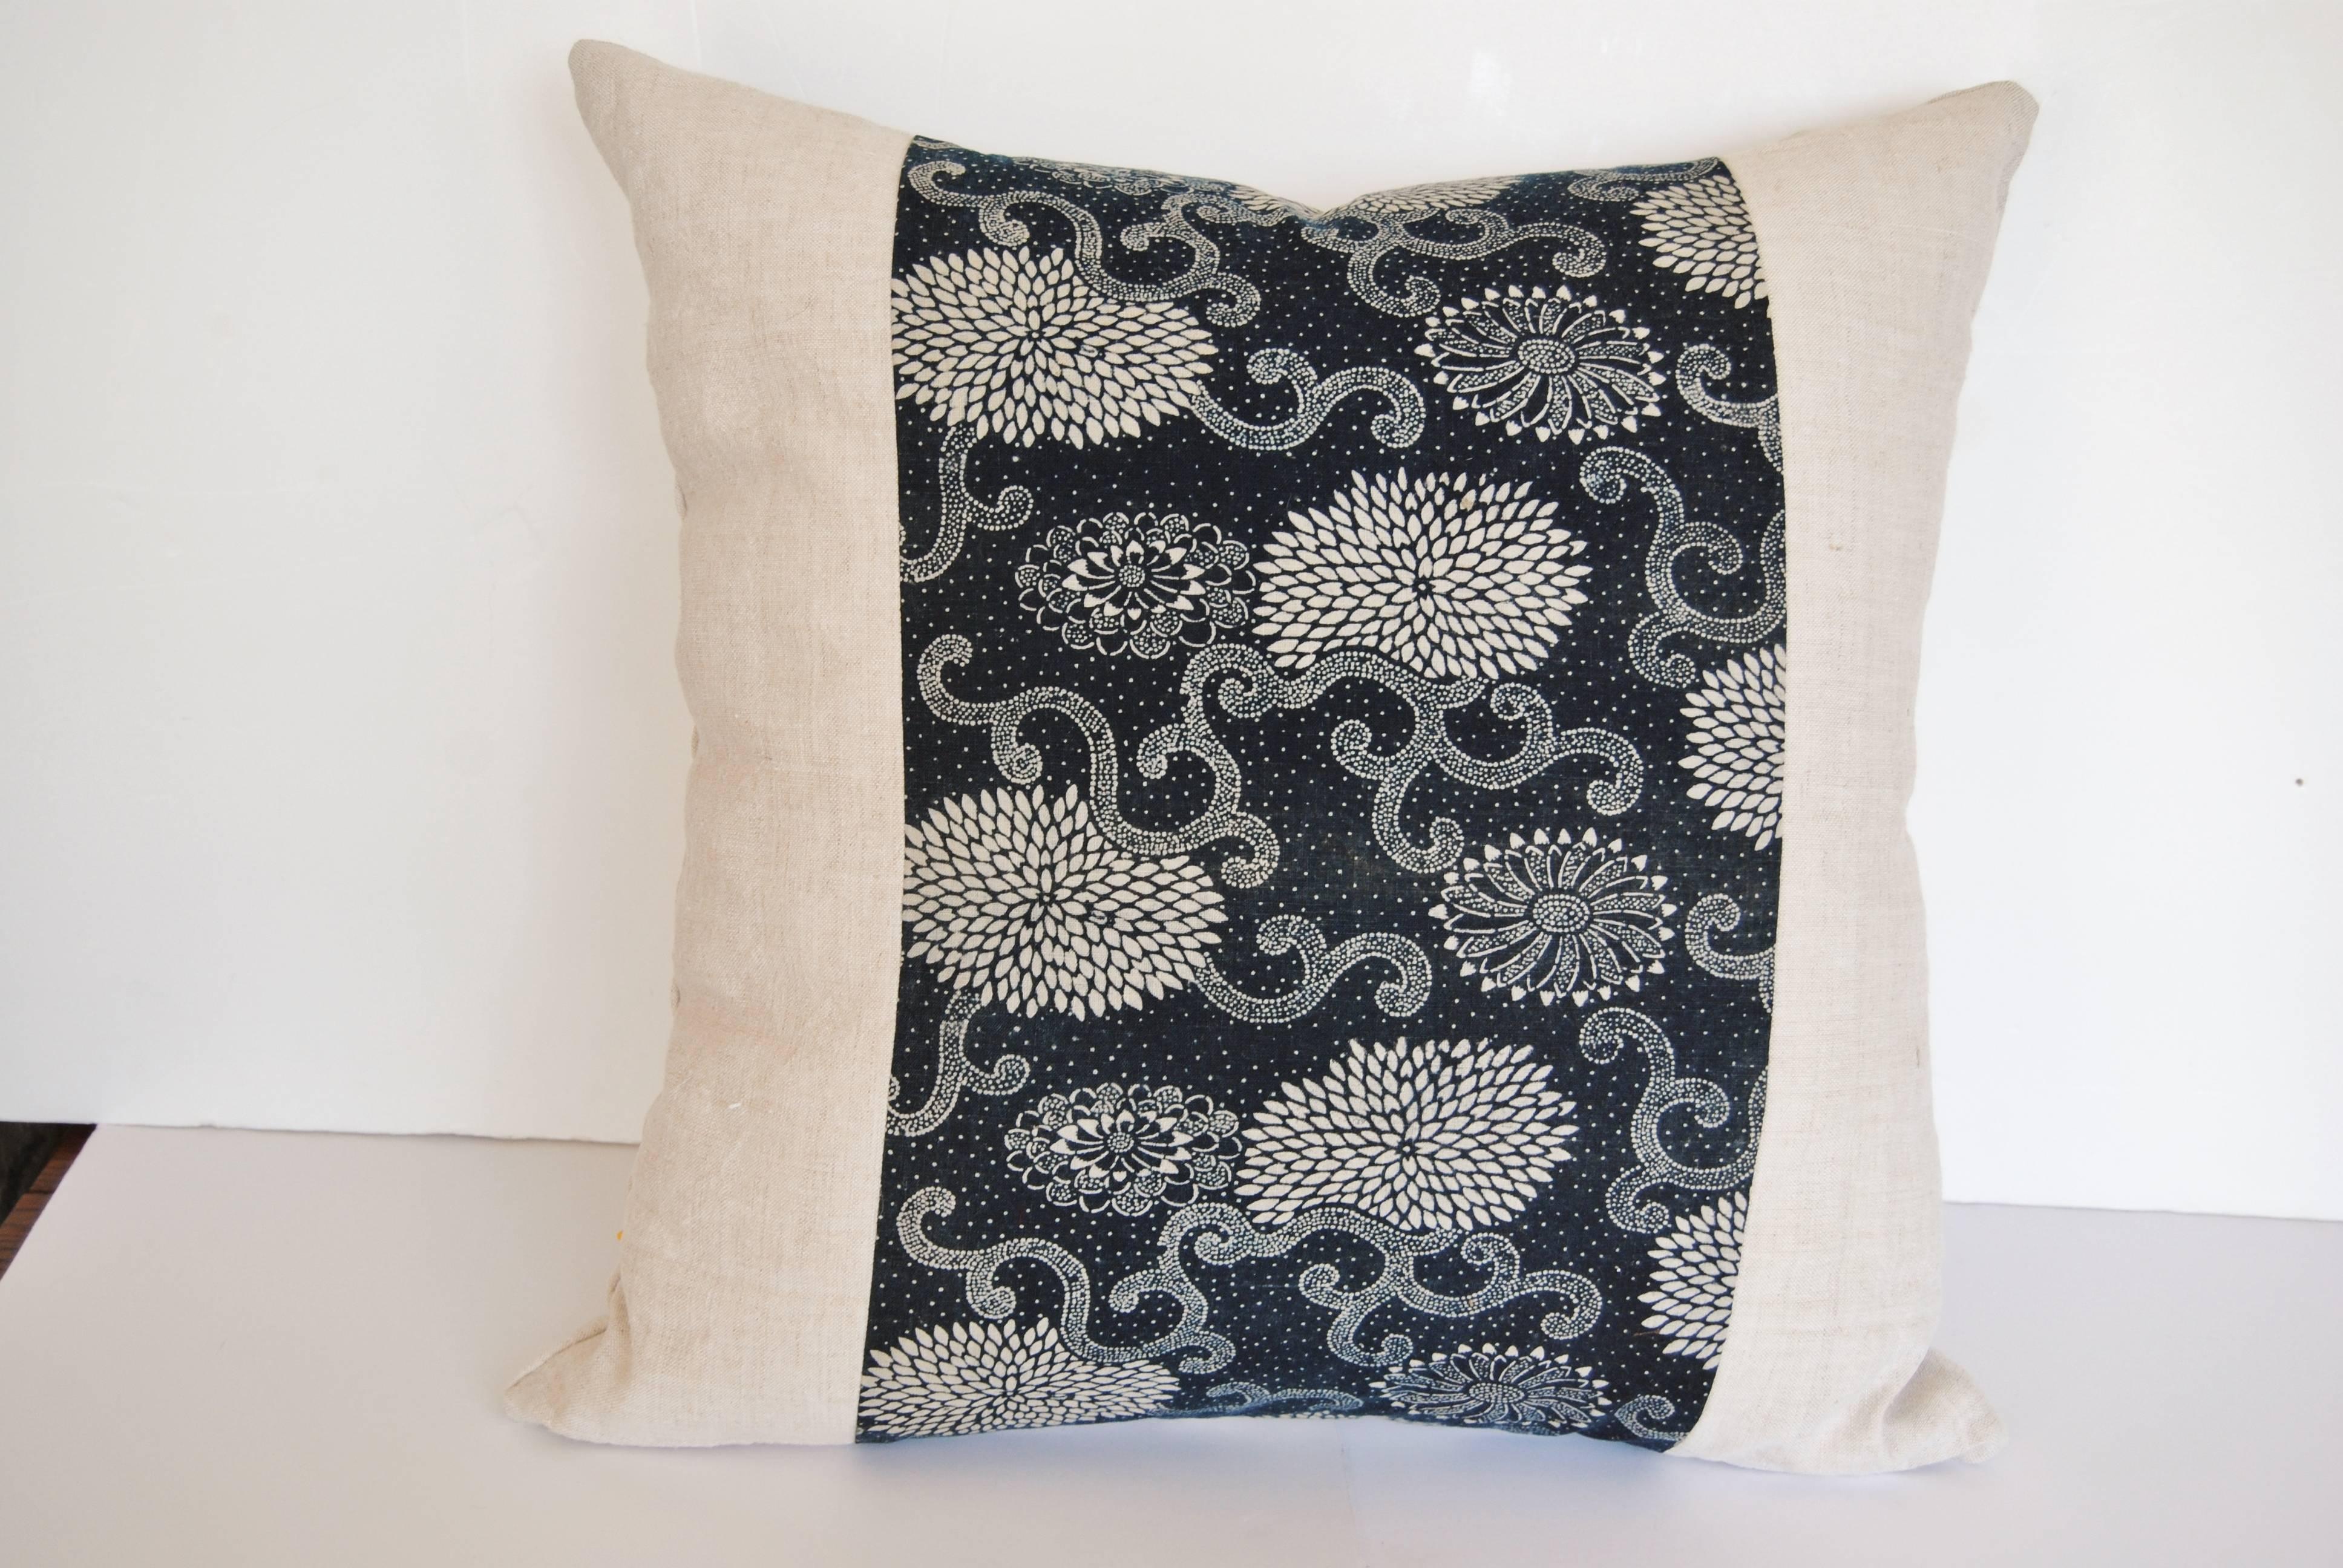 Custom pillows cut from an antique hand loomed Japanese indigo katazome [stencil resist dyeing] cotton textile. The indigo textile fragment is faced and backed with a hand loomed off white French antique linen. The pillows are filled with an insert